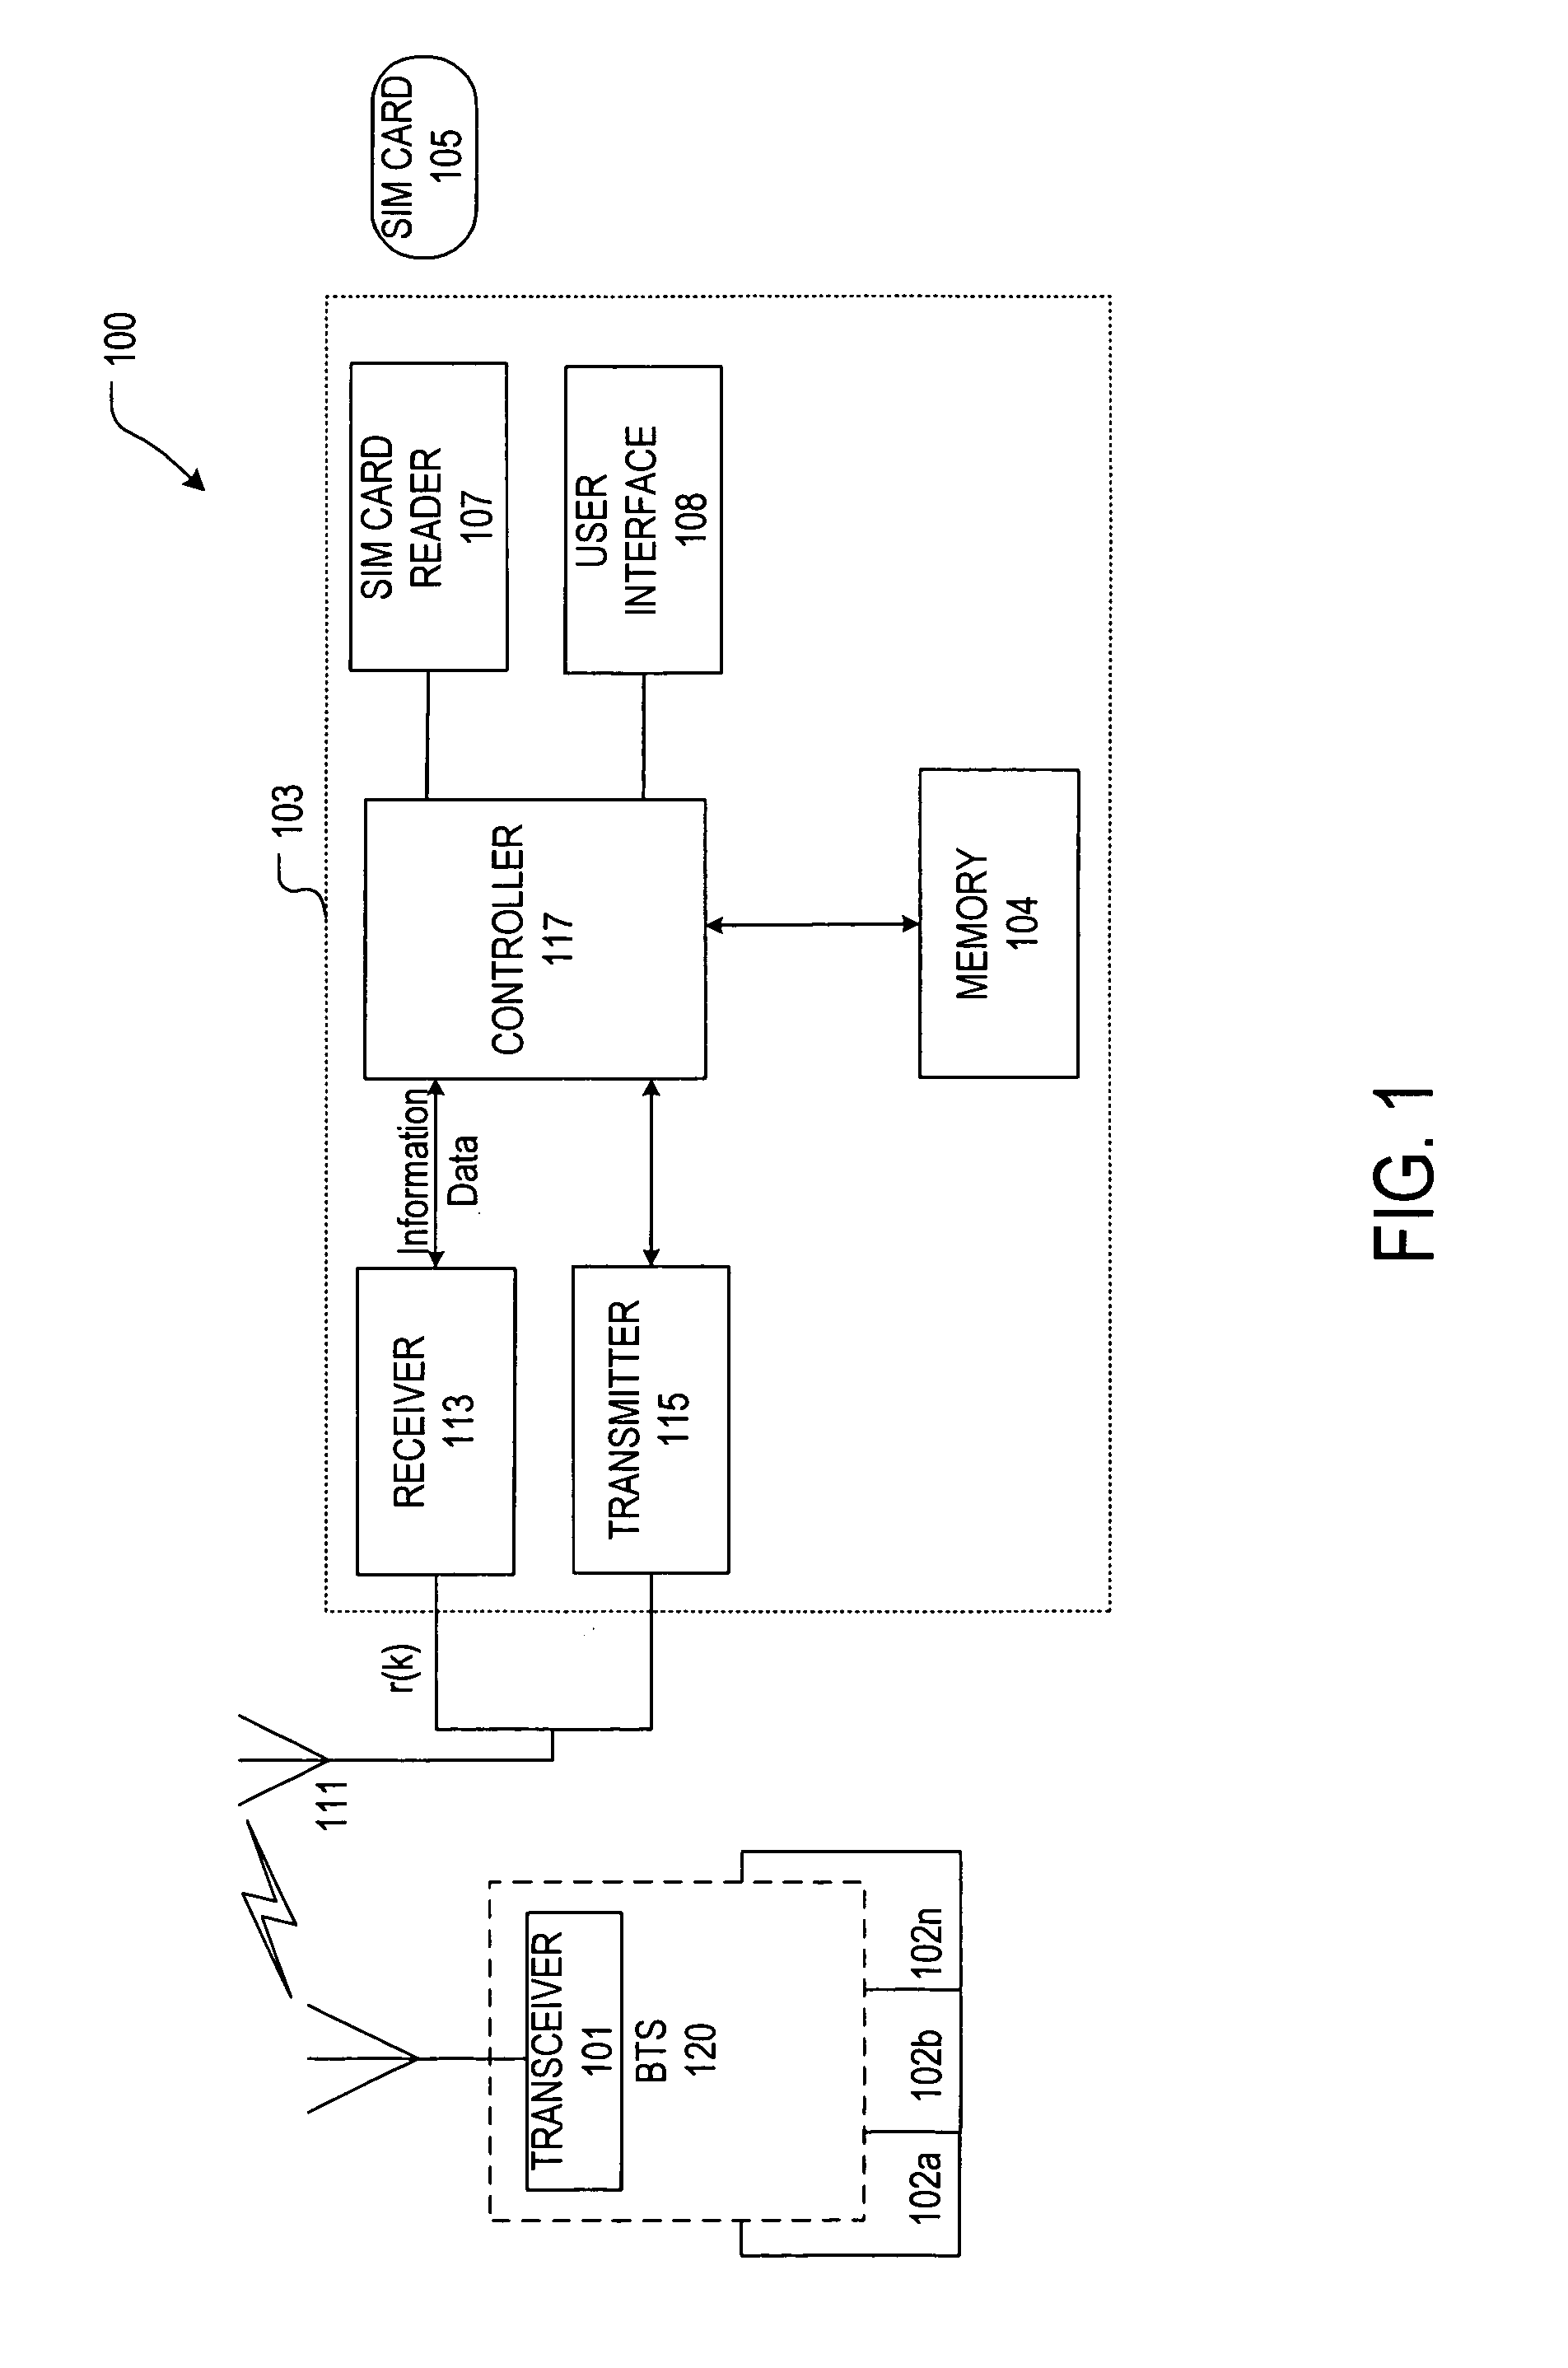 Interference cancellation and receive diversity for single-valued modulation receivers